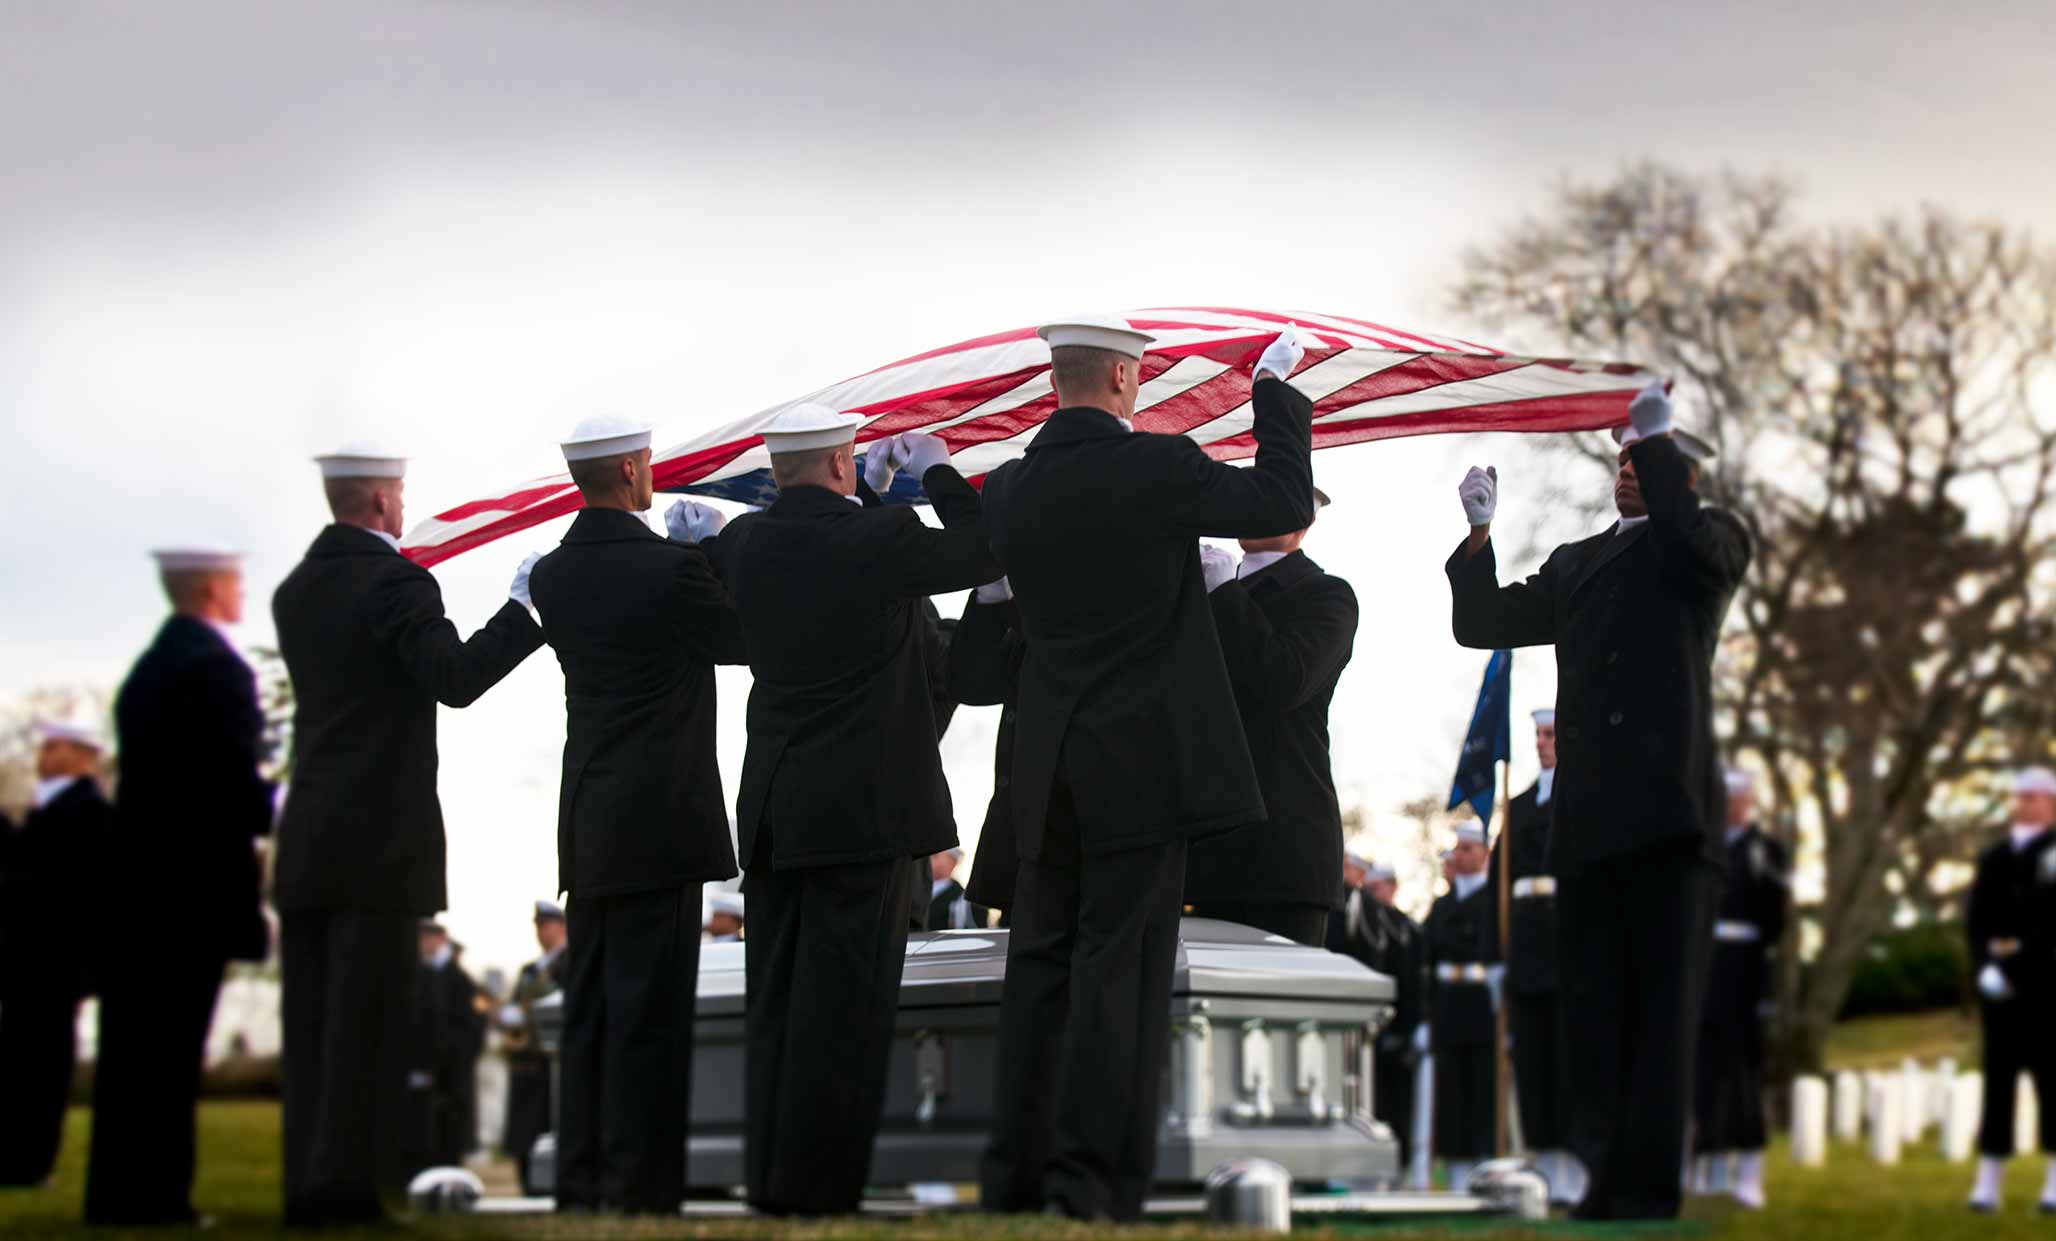 Navy members drape the American flag over a casket during a funeral ceremony for a fallen comrade